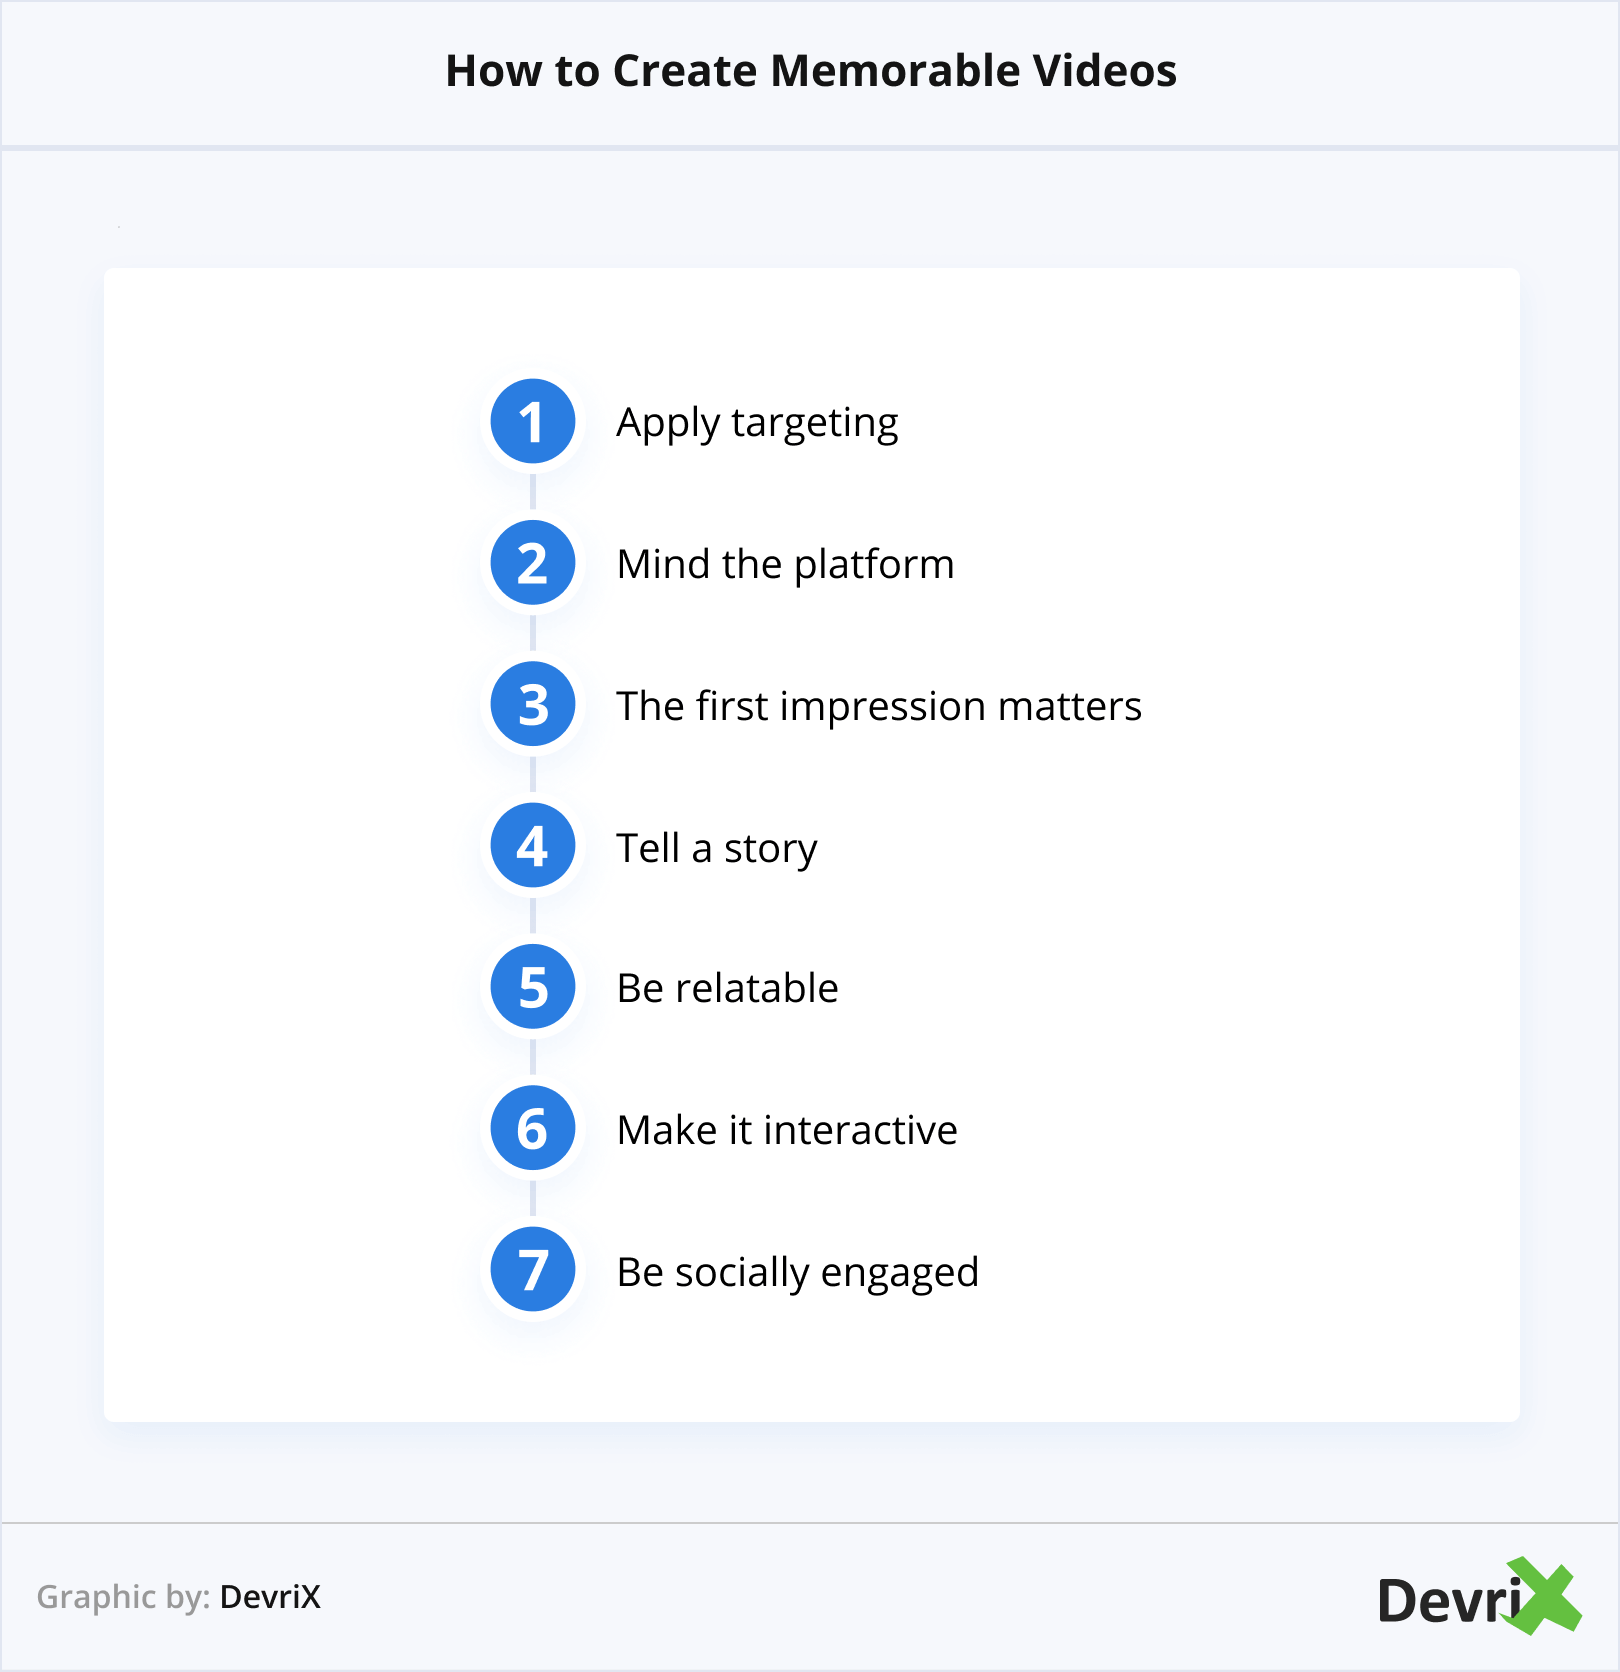 How to Create Memorable Videos